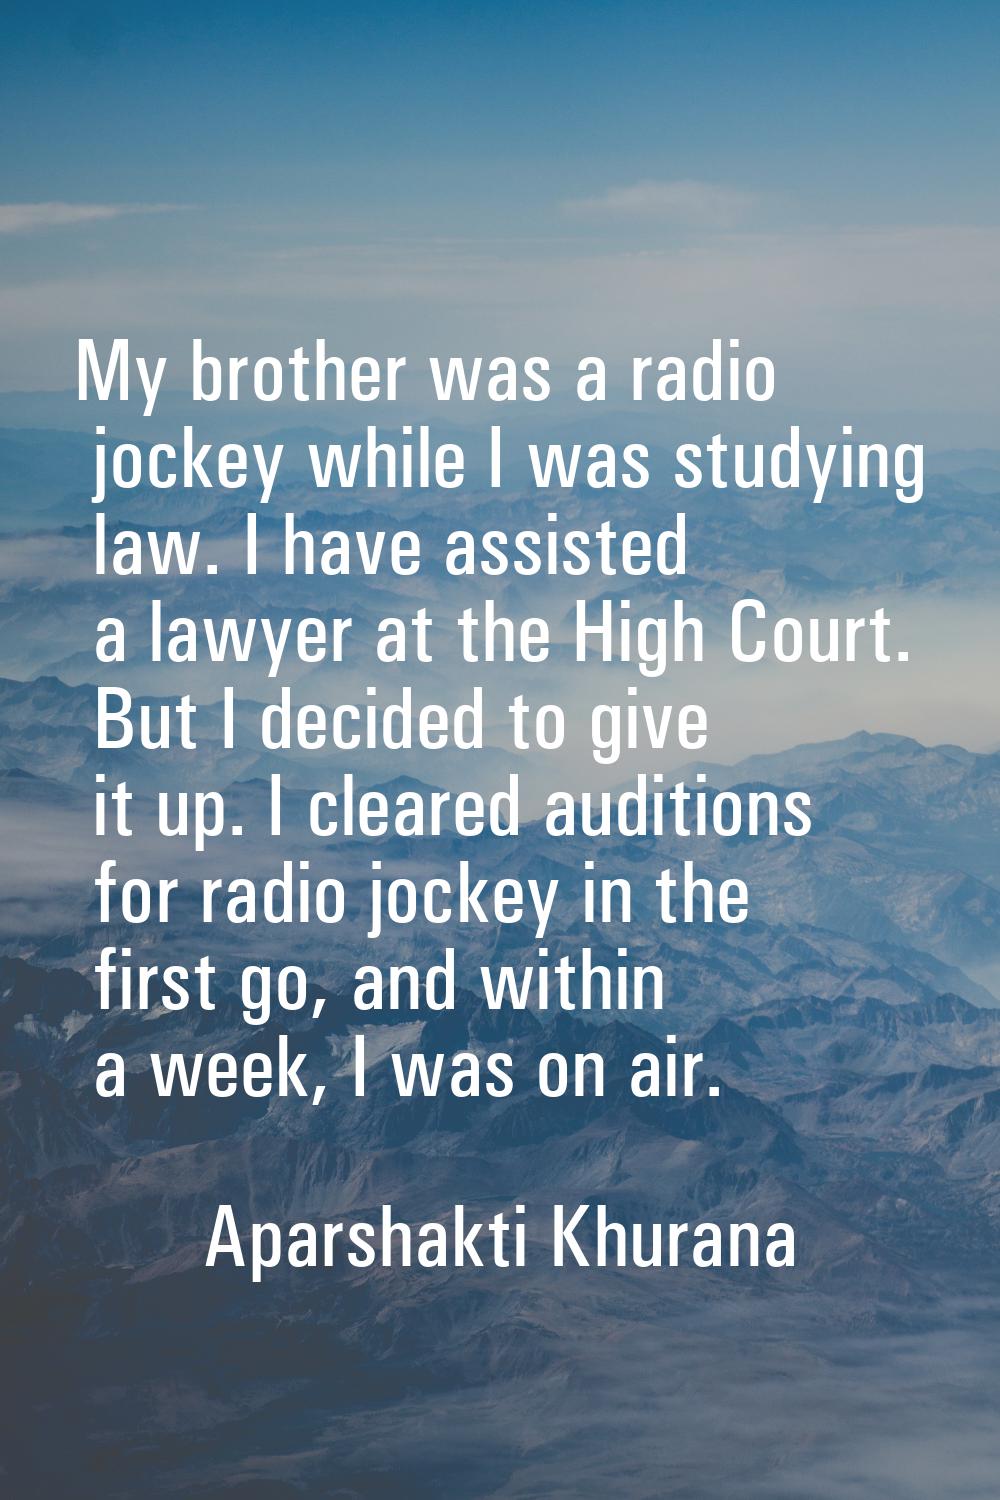 My brother was a radio jockey while I was studying law. I have assisted a lawyer at the High Court.